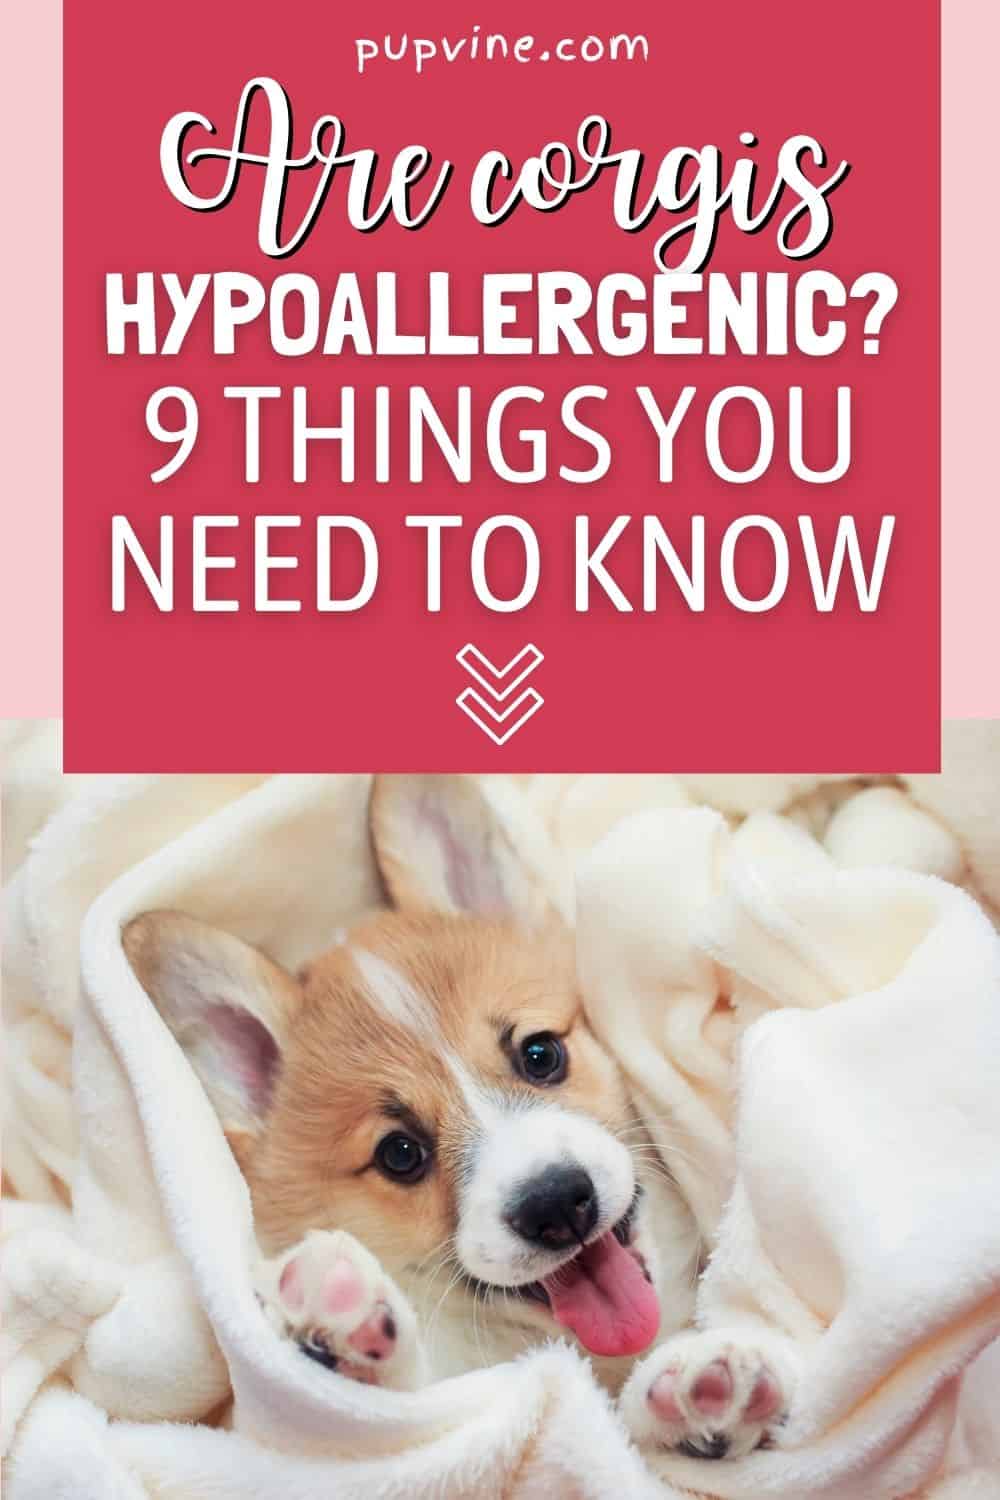 Are Corgis Hypoallergenic? 9 Things You Need To Know